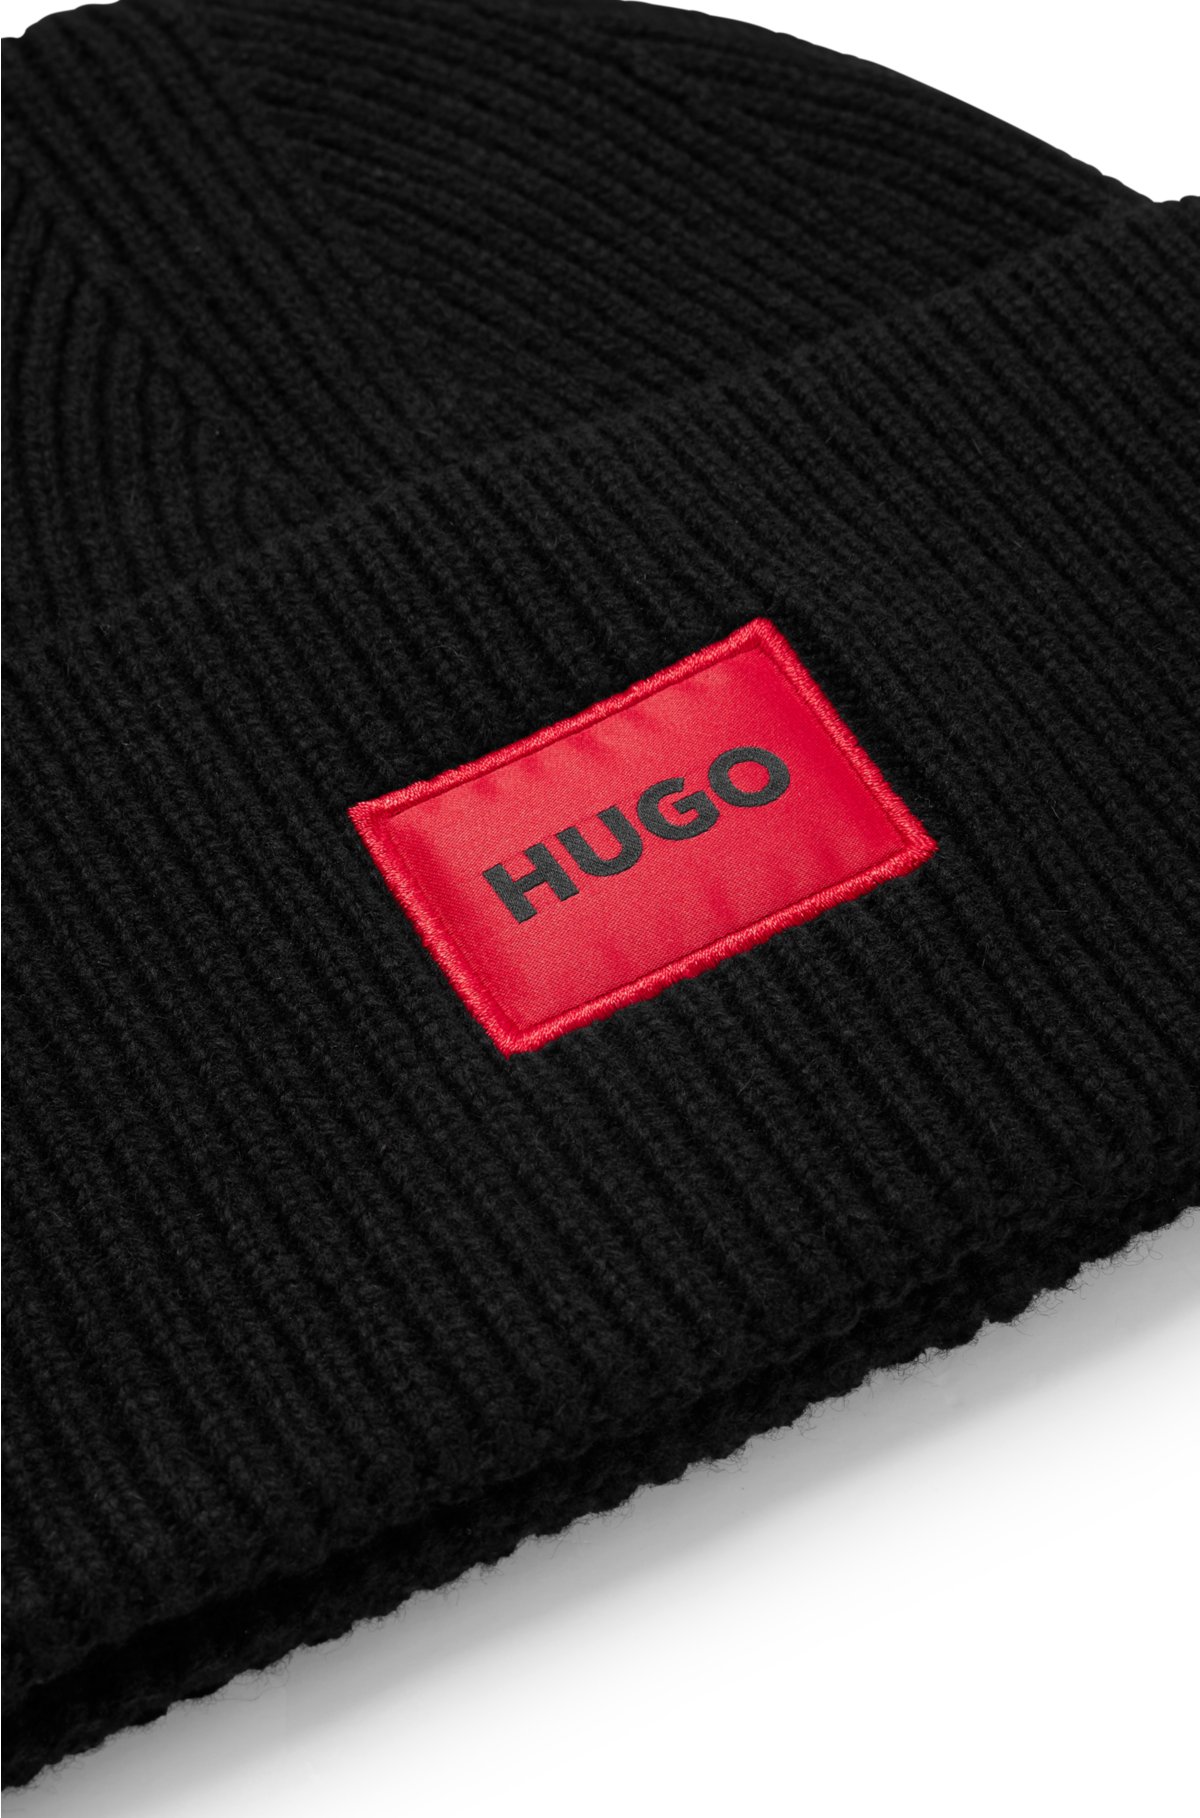 with Wool-blend - beanie hat logo red label HUGO